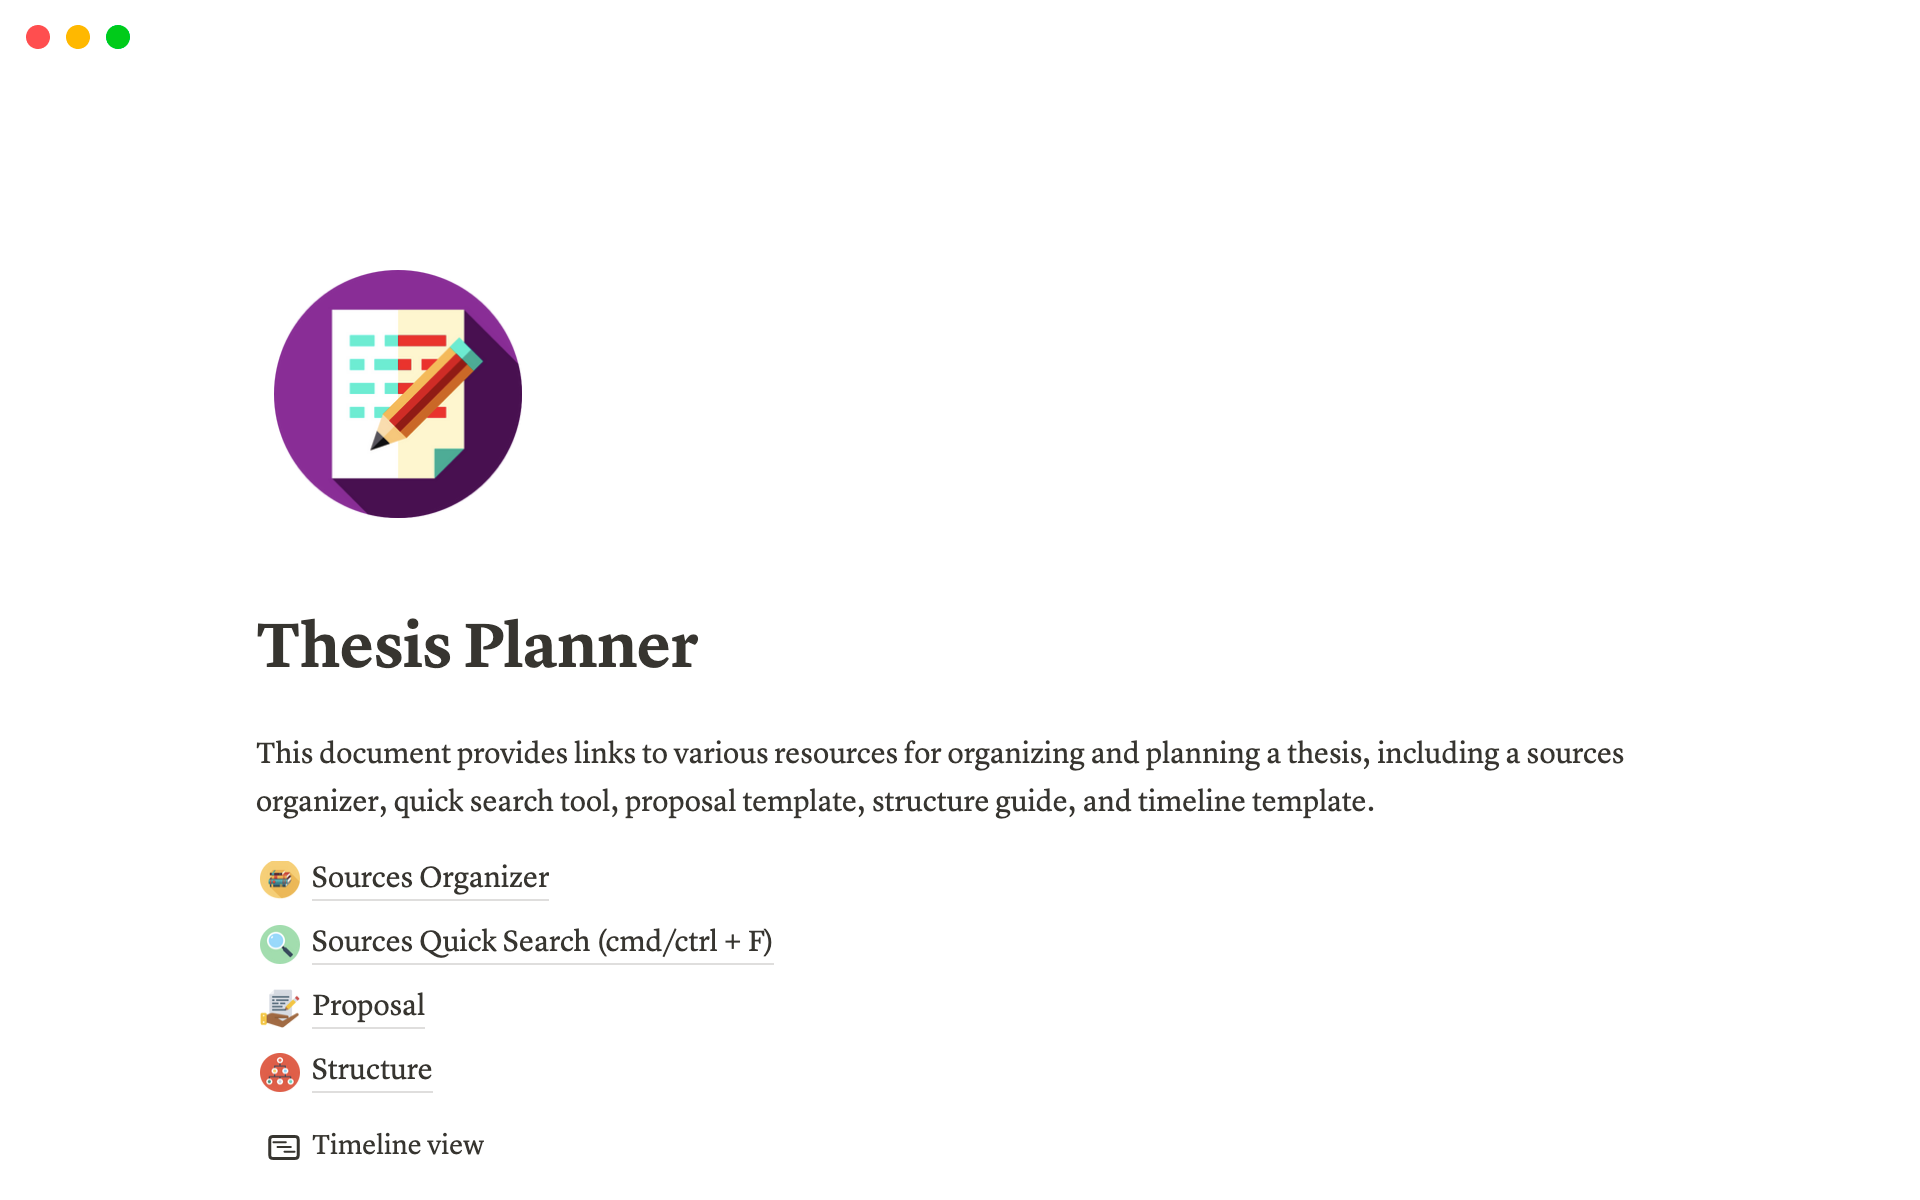 Plans and organises your thesis all in one place.